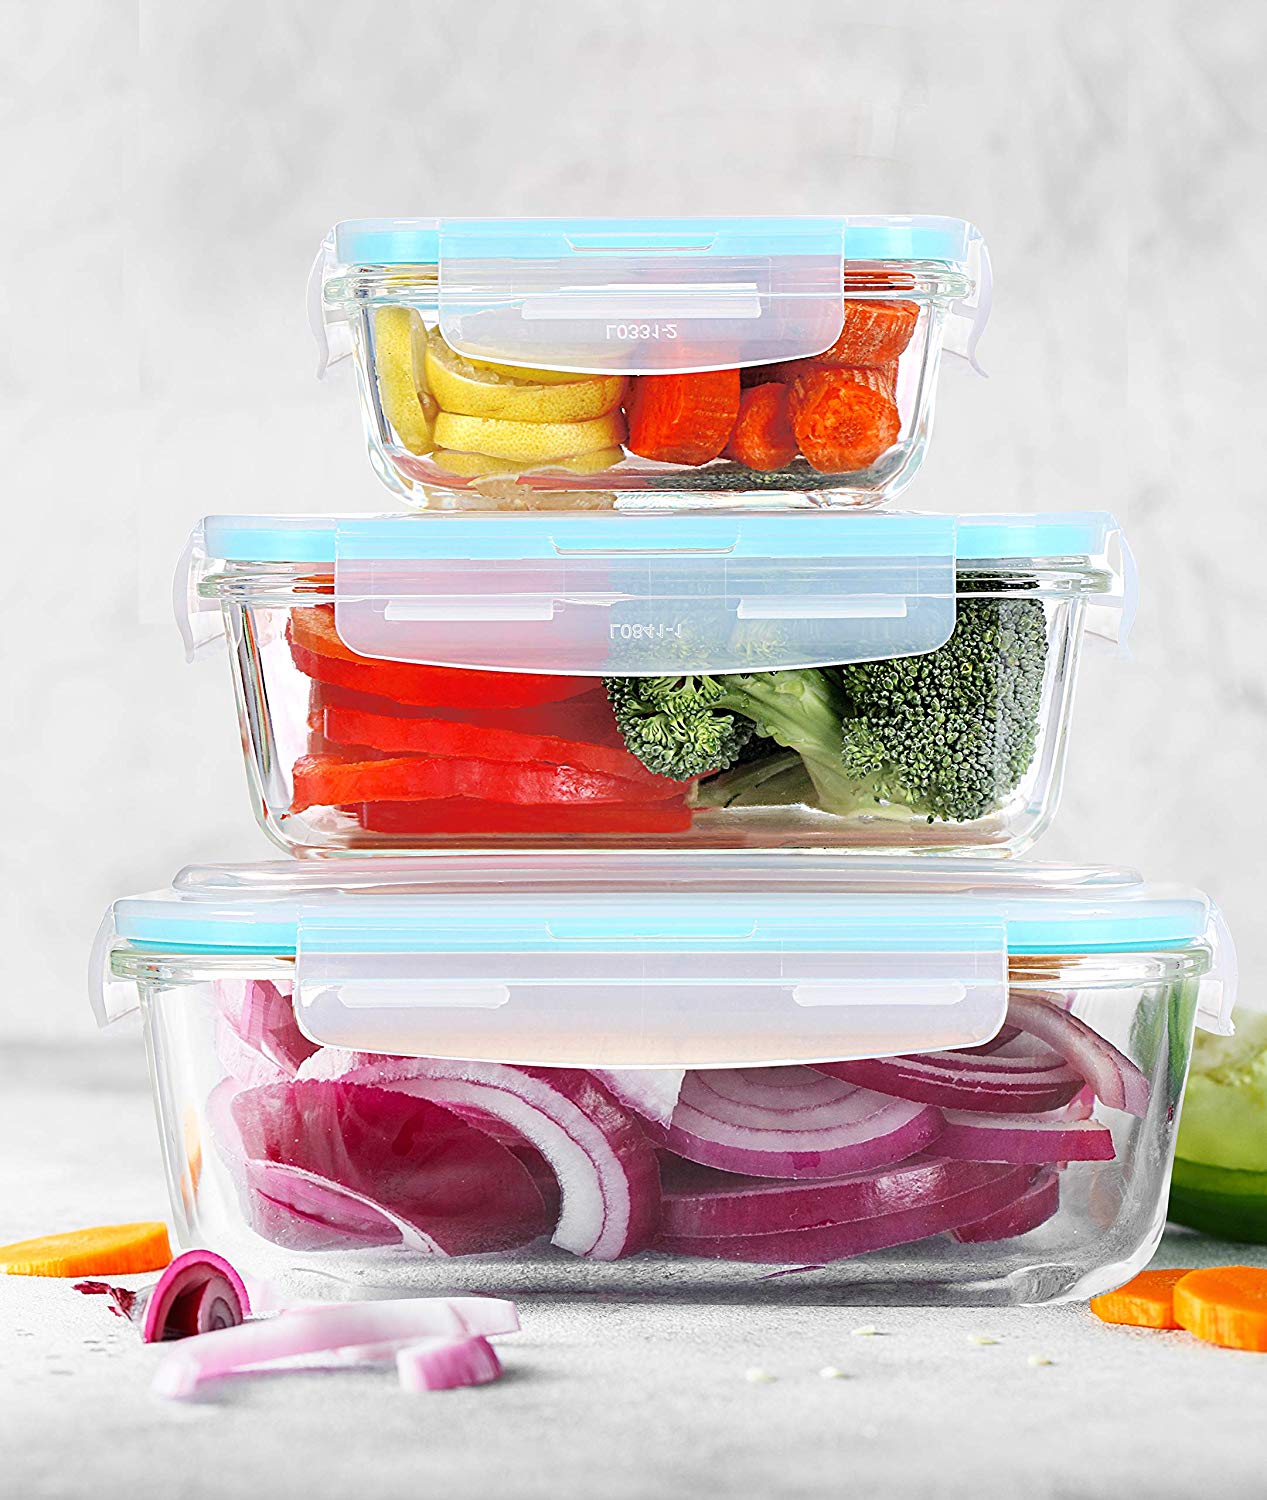 KICHLY Plastic Airtight Food Storage Containers - 18 Pieces (9 Containers & 9 Lids) Plastic Food Containers with Lids for Kitchen & Pantry Lea